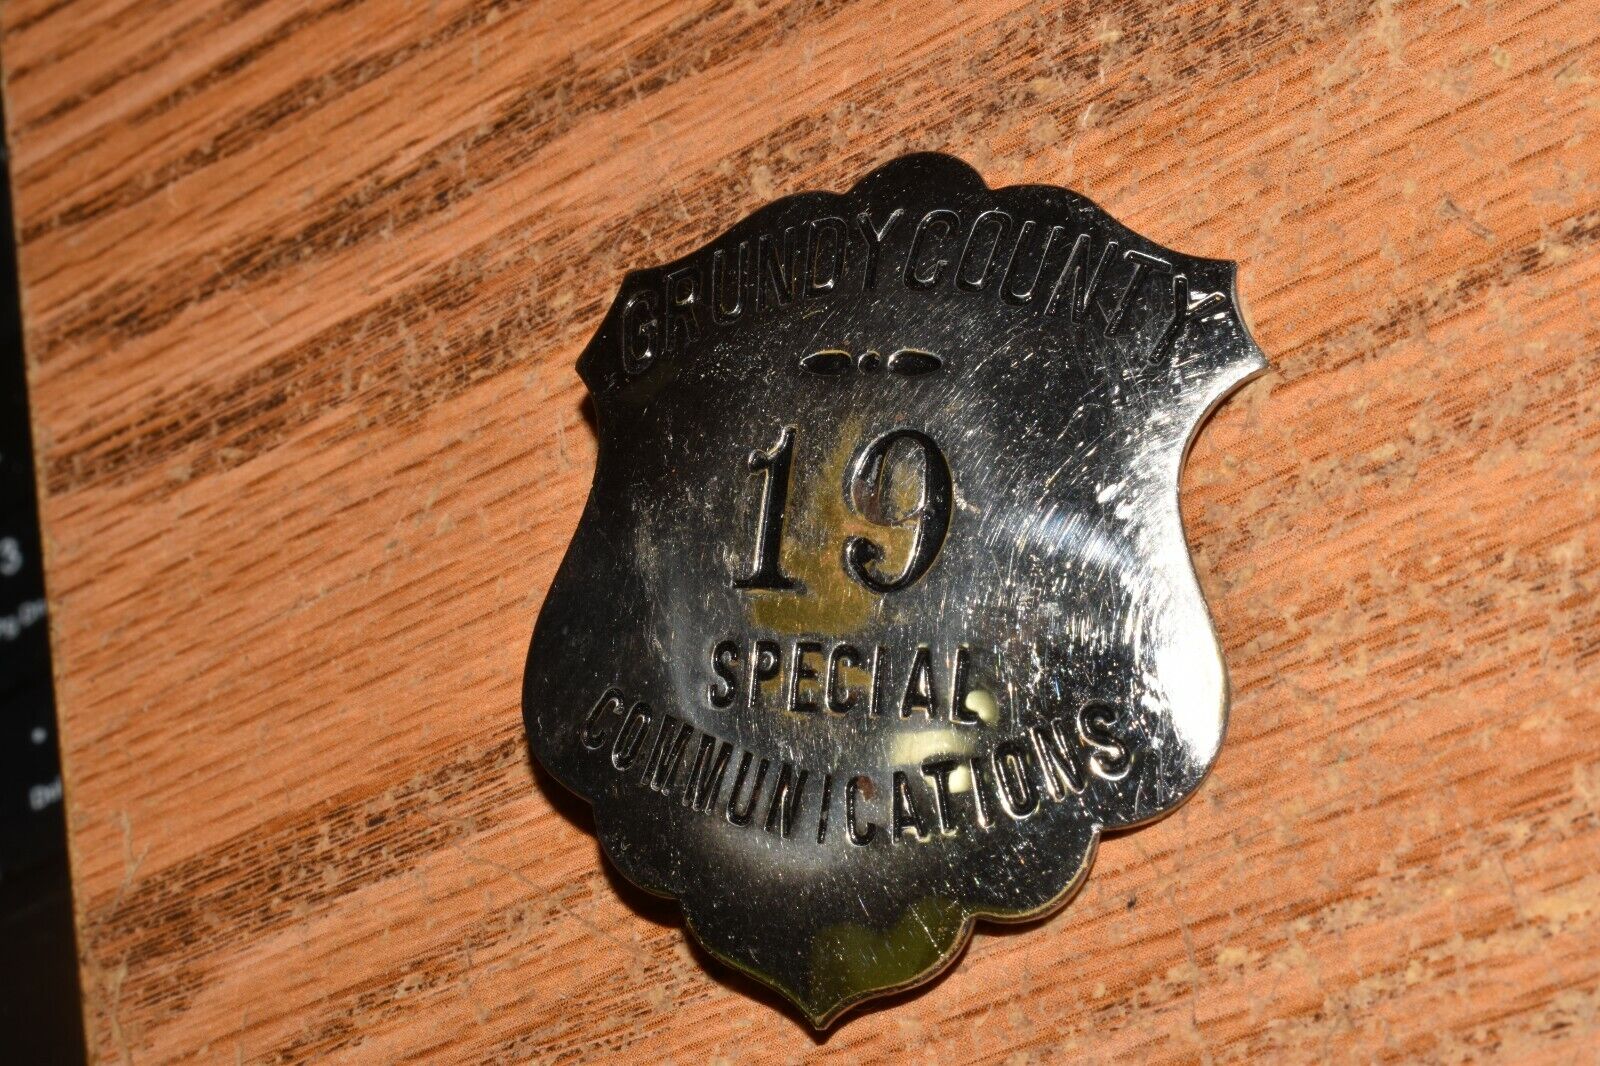 Grundy County Illinois Special Communications Operator Badge  Obsolete US badges